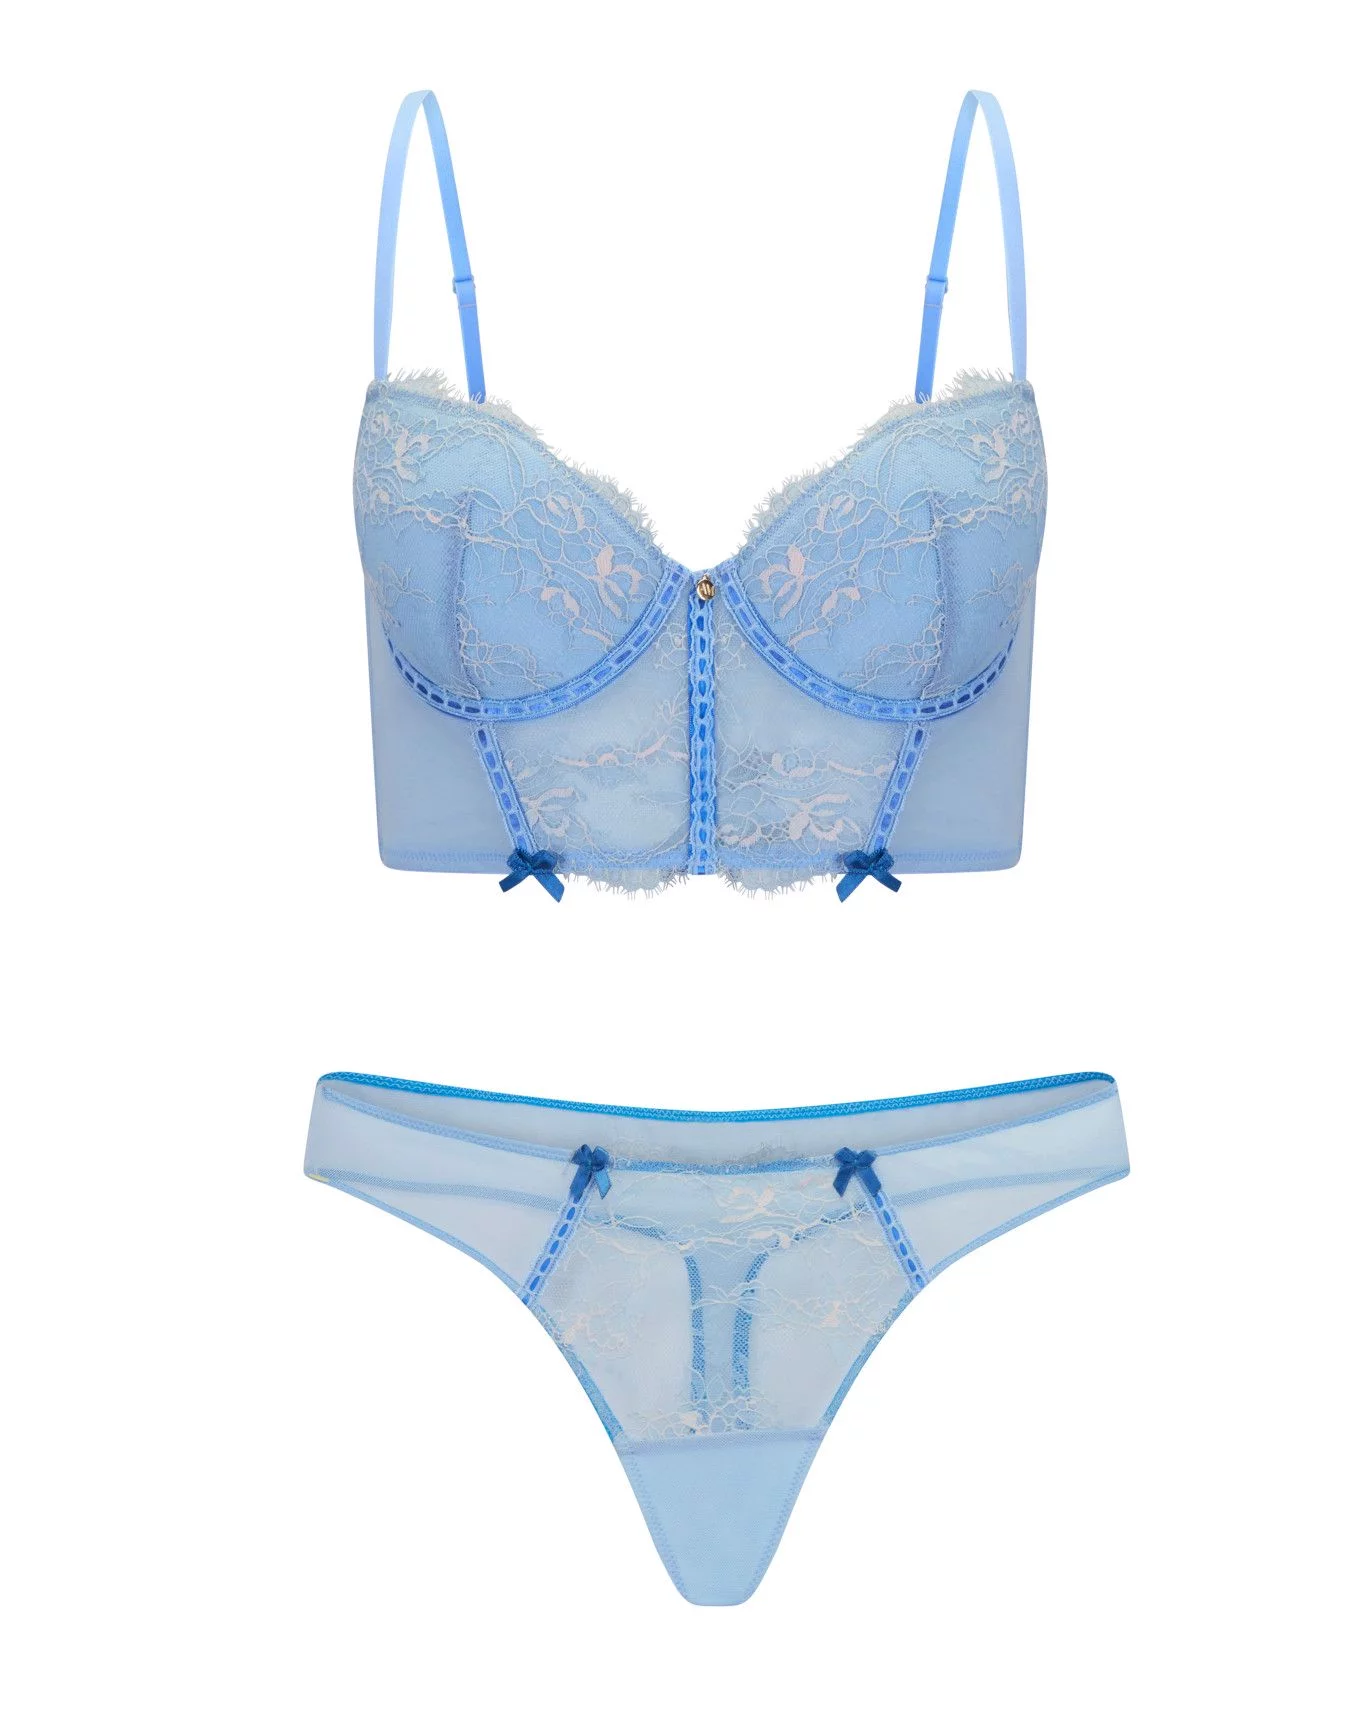 Blue Dioni underwired lace and satin bra